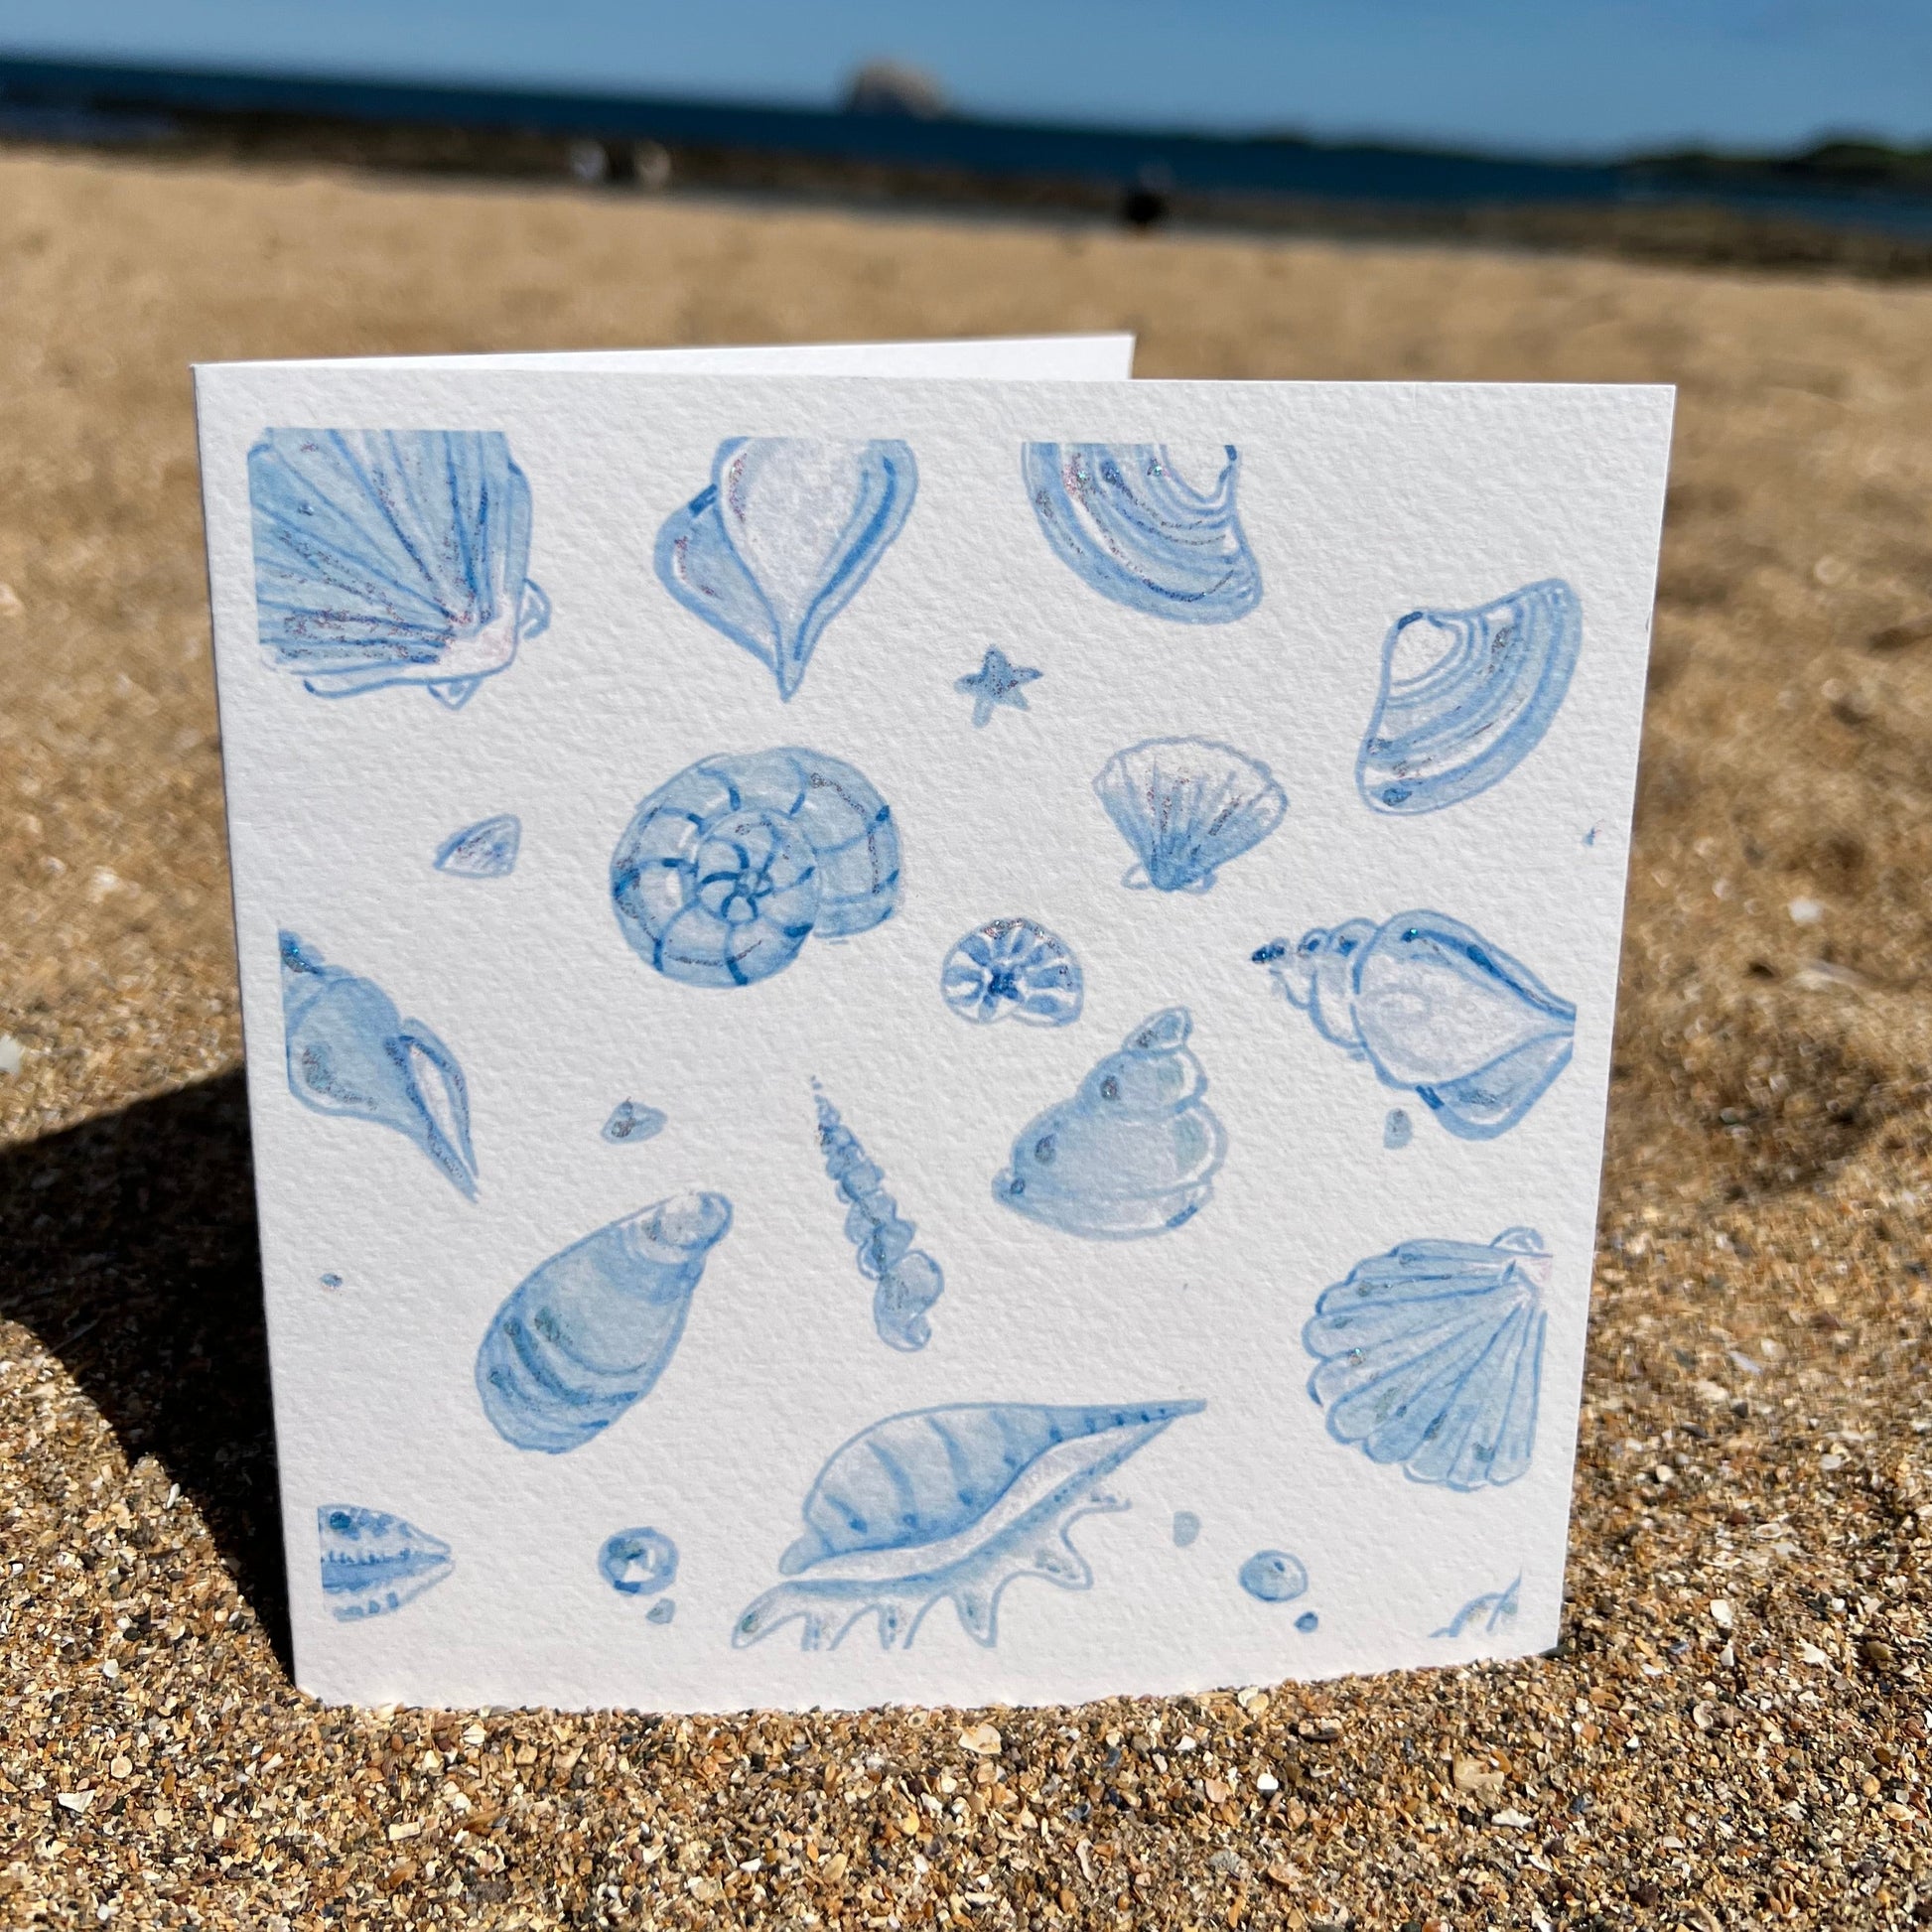 Printed art card - various watercolour shells all in blue tones sitting on sand with beach in background